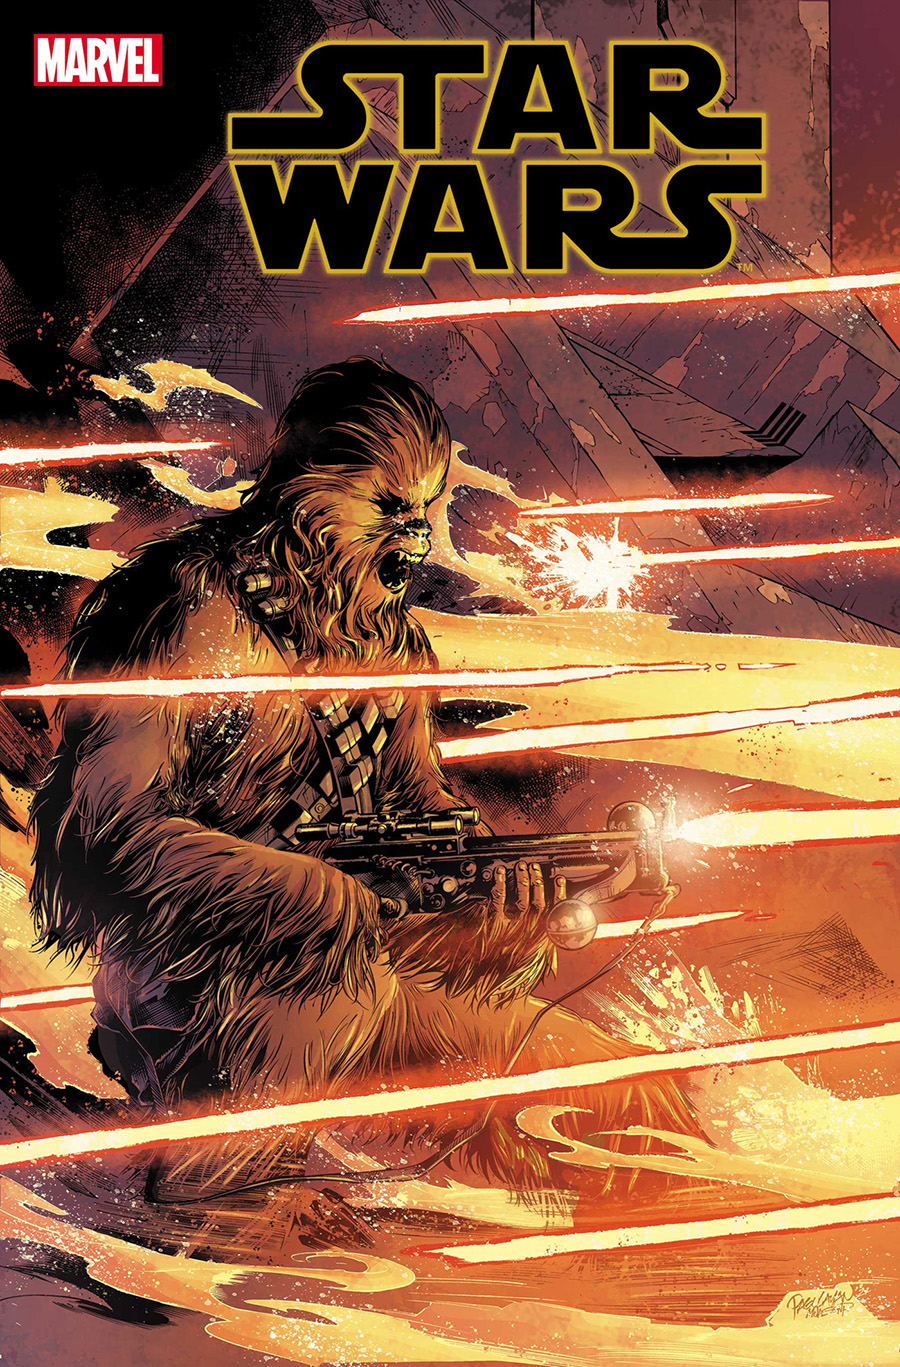 Star Wars Vol 5 #22 Cover A Regular Carlo Pagulayan Cover